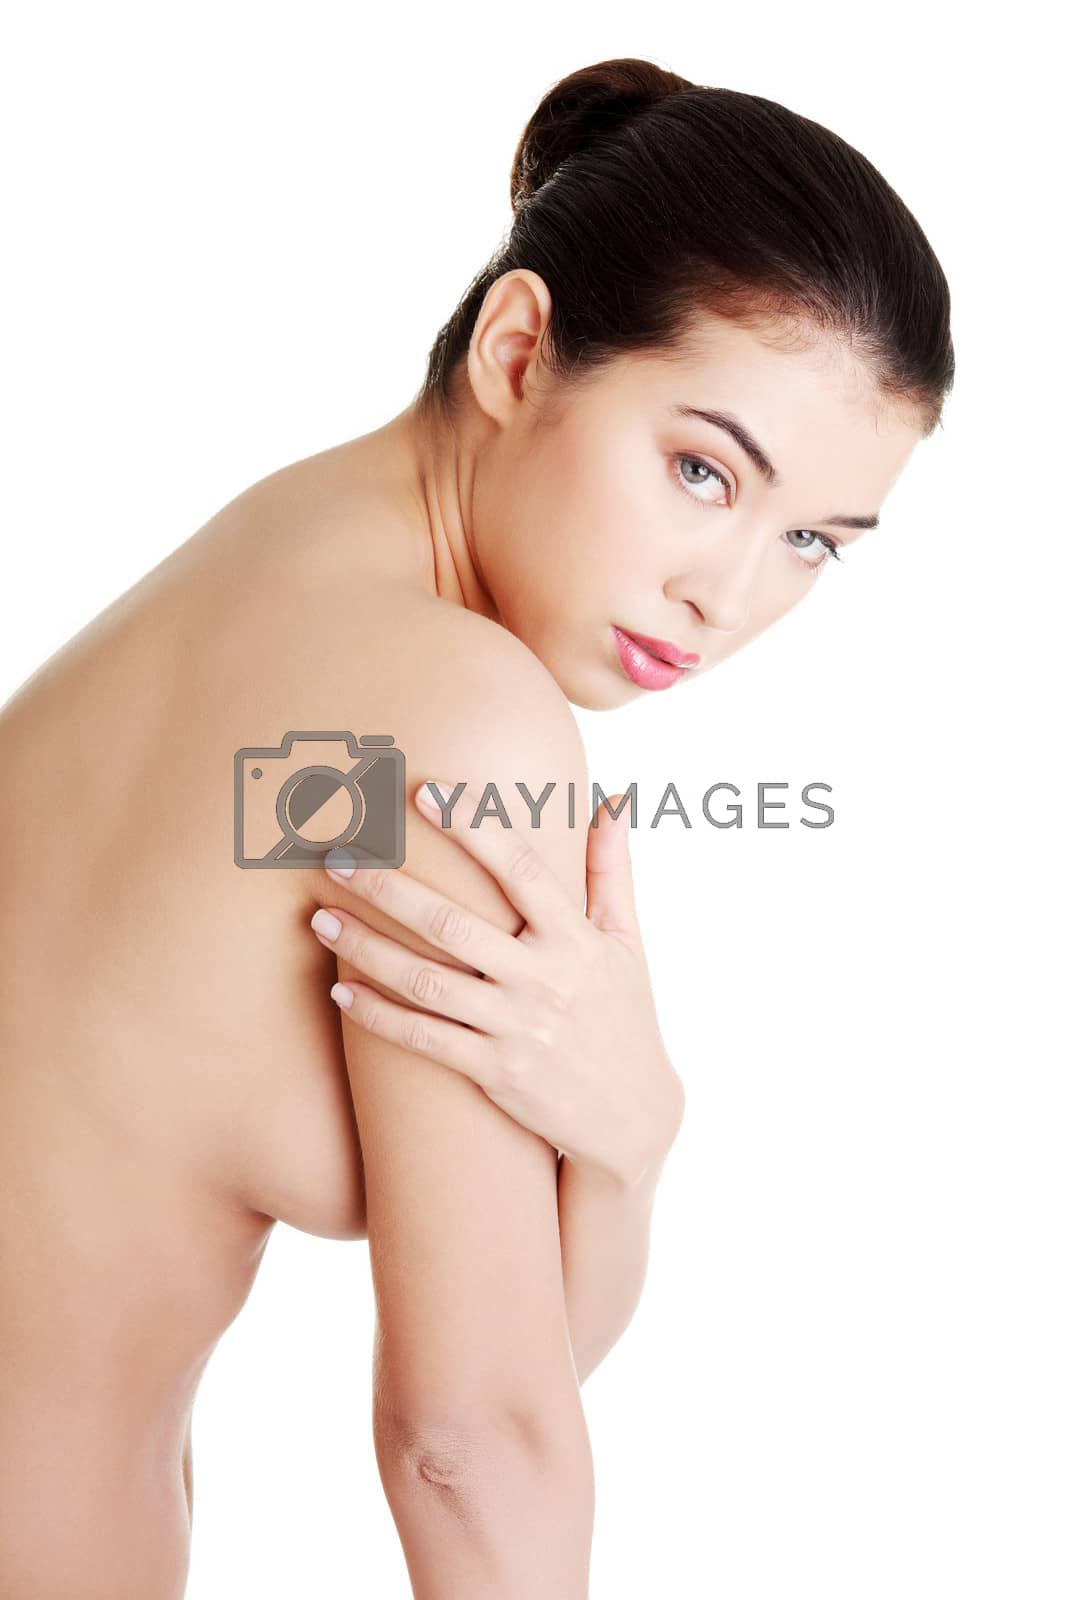 Royalty free image of Beautiful fit topless woman by BDS